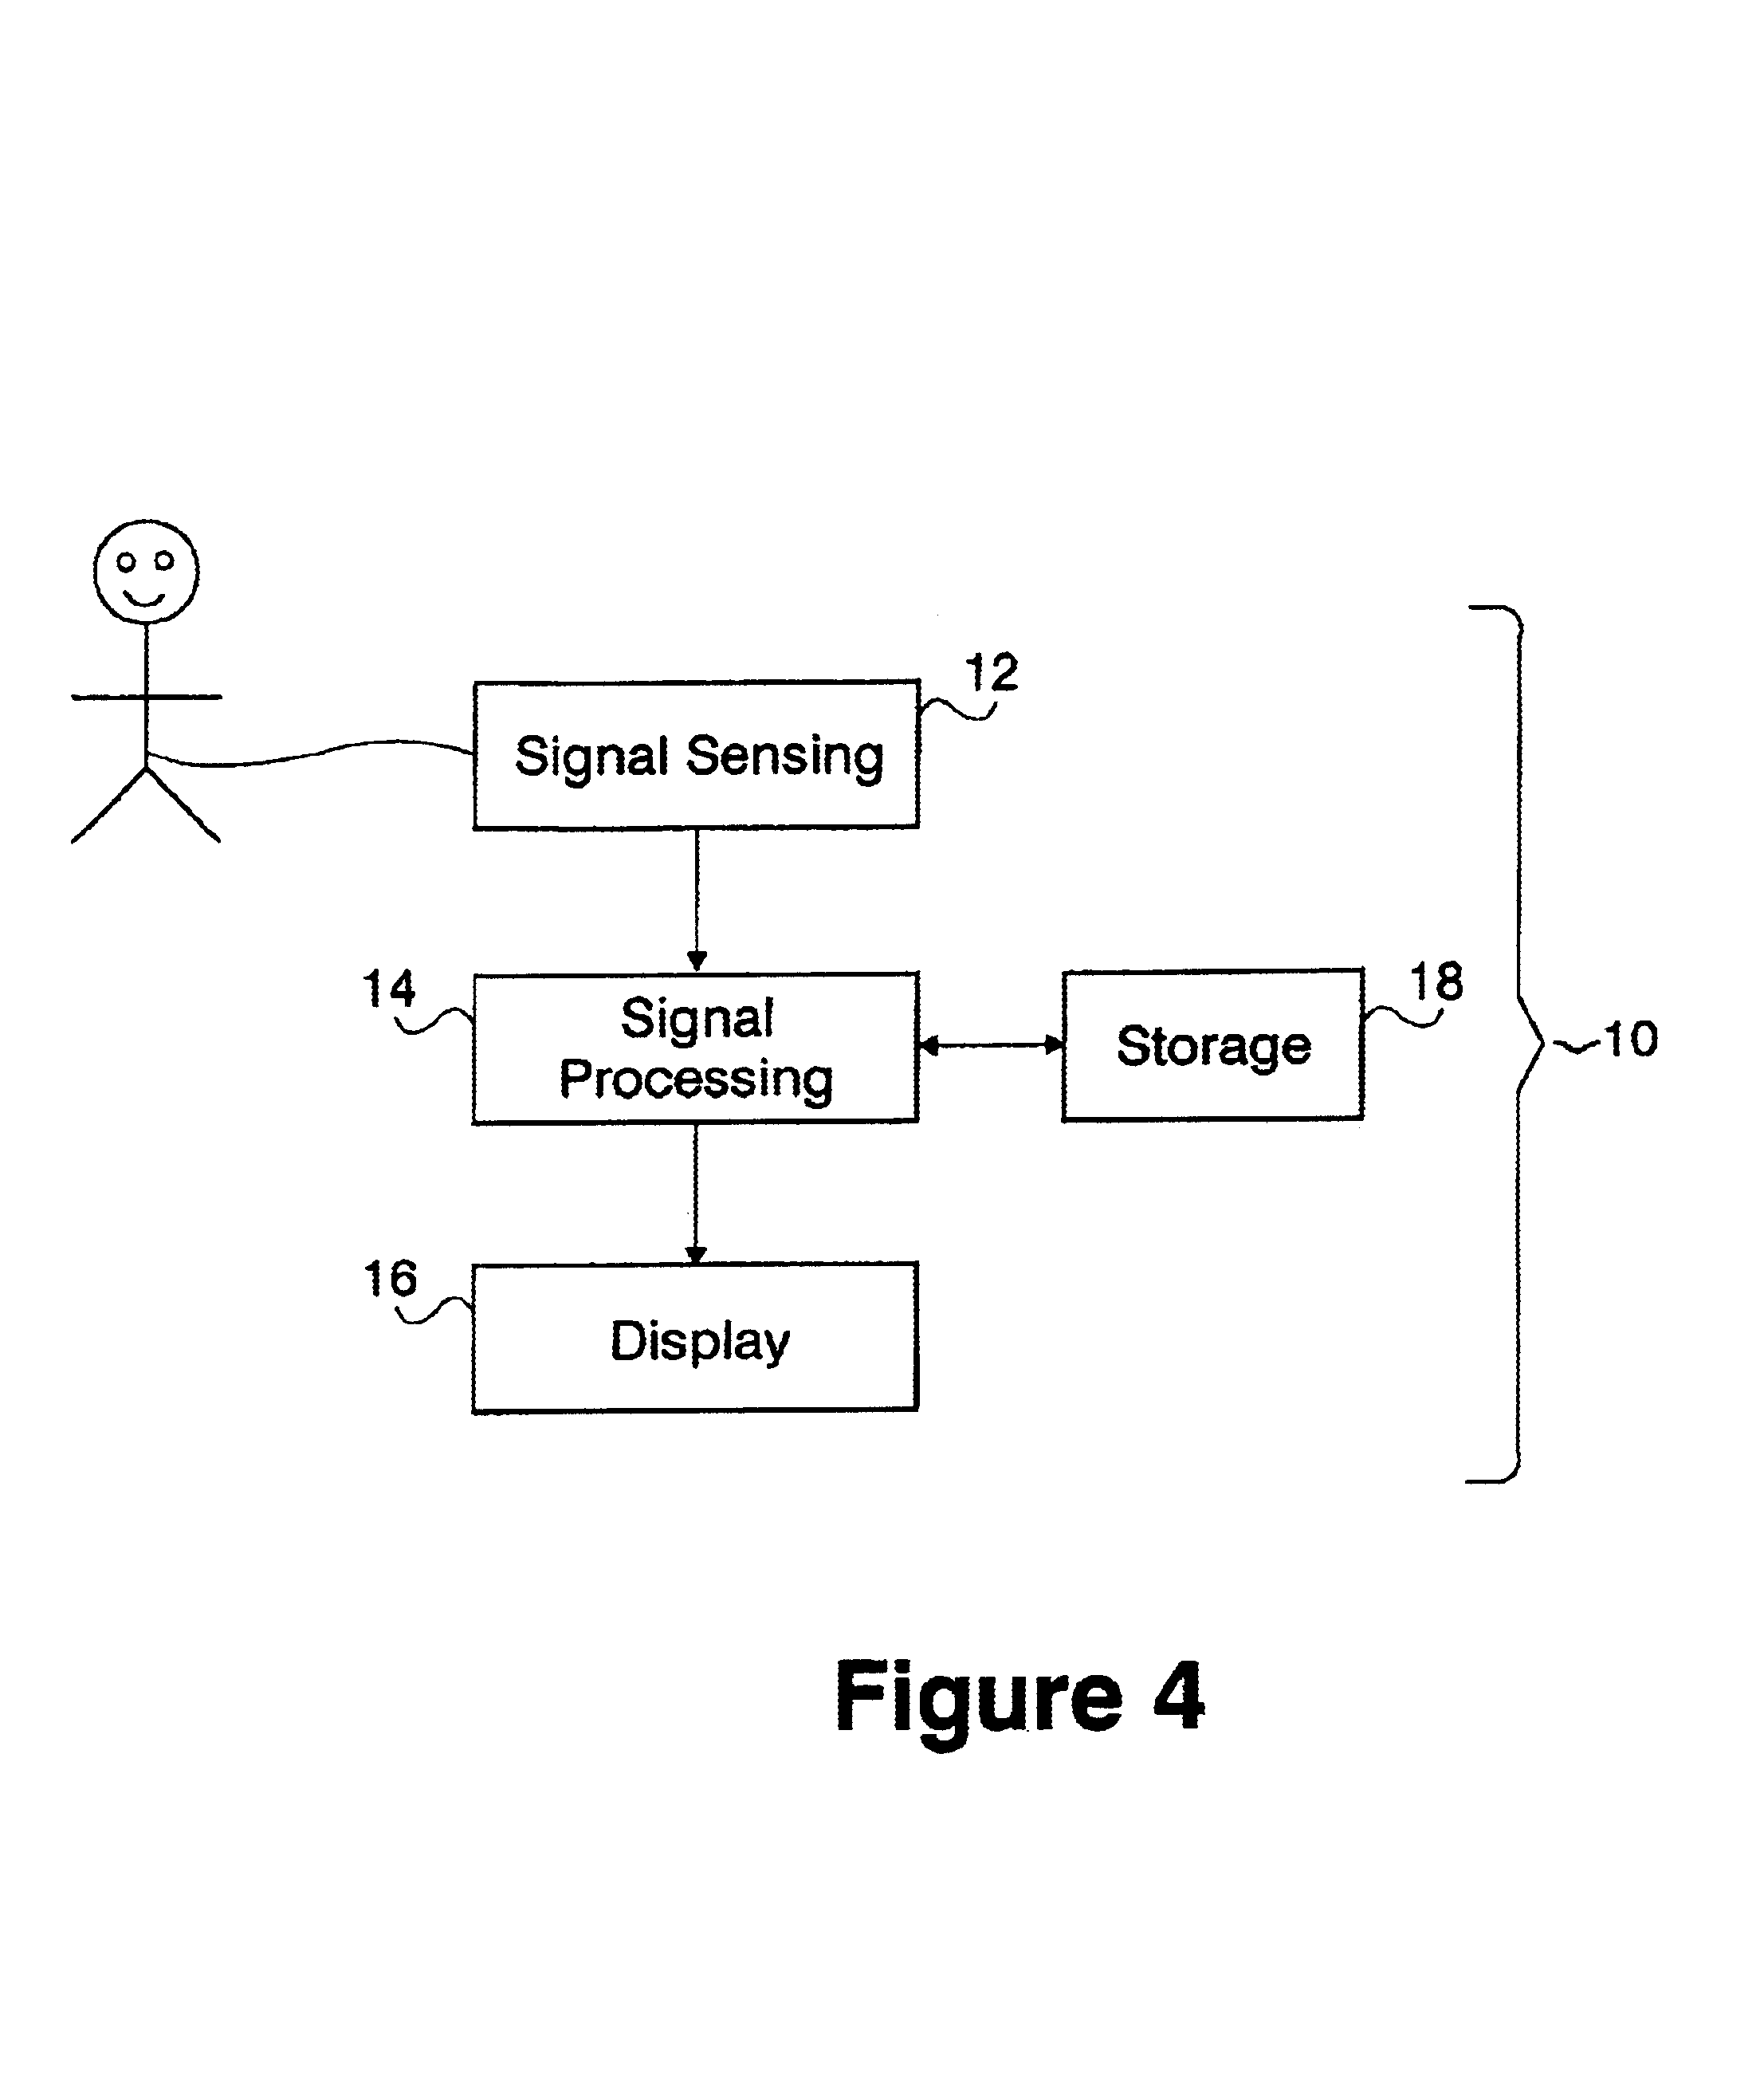 Methods for processing electrocardiac signals having superimposed complexes